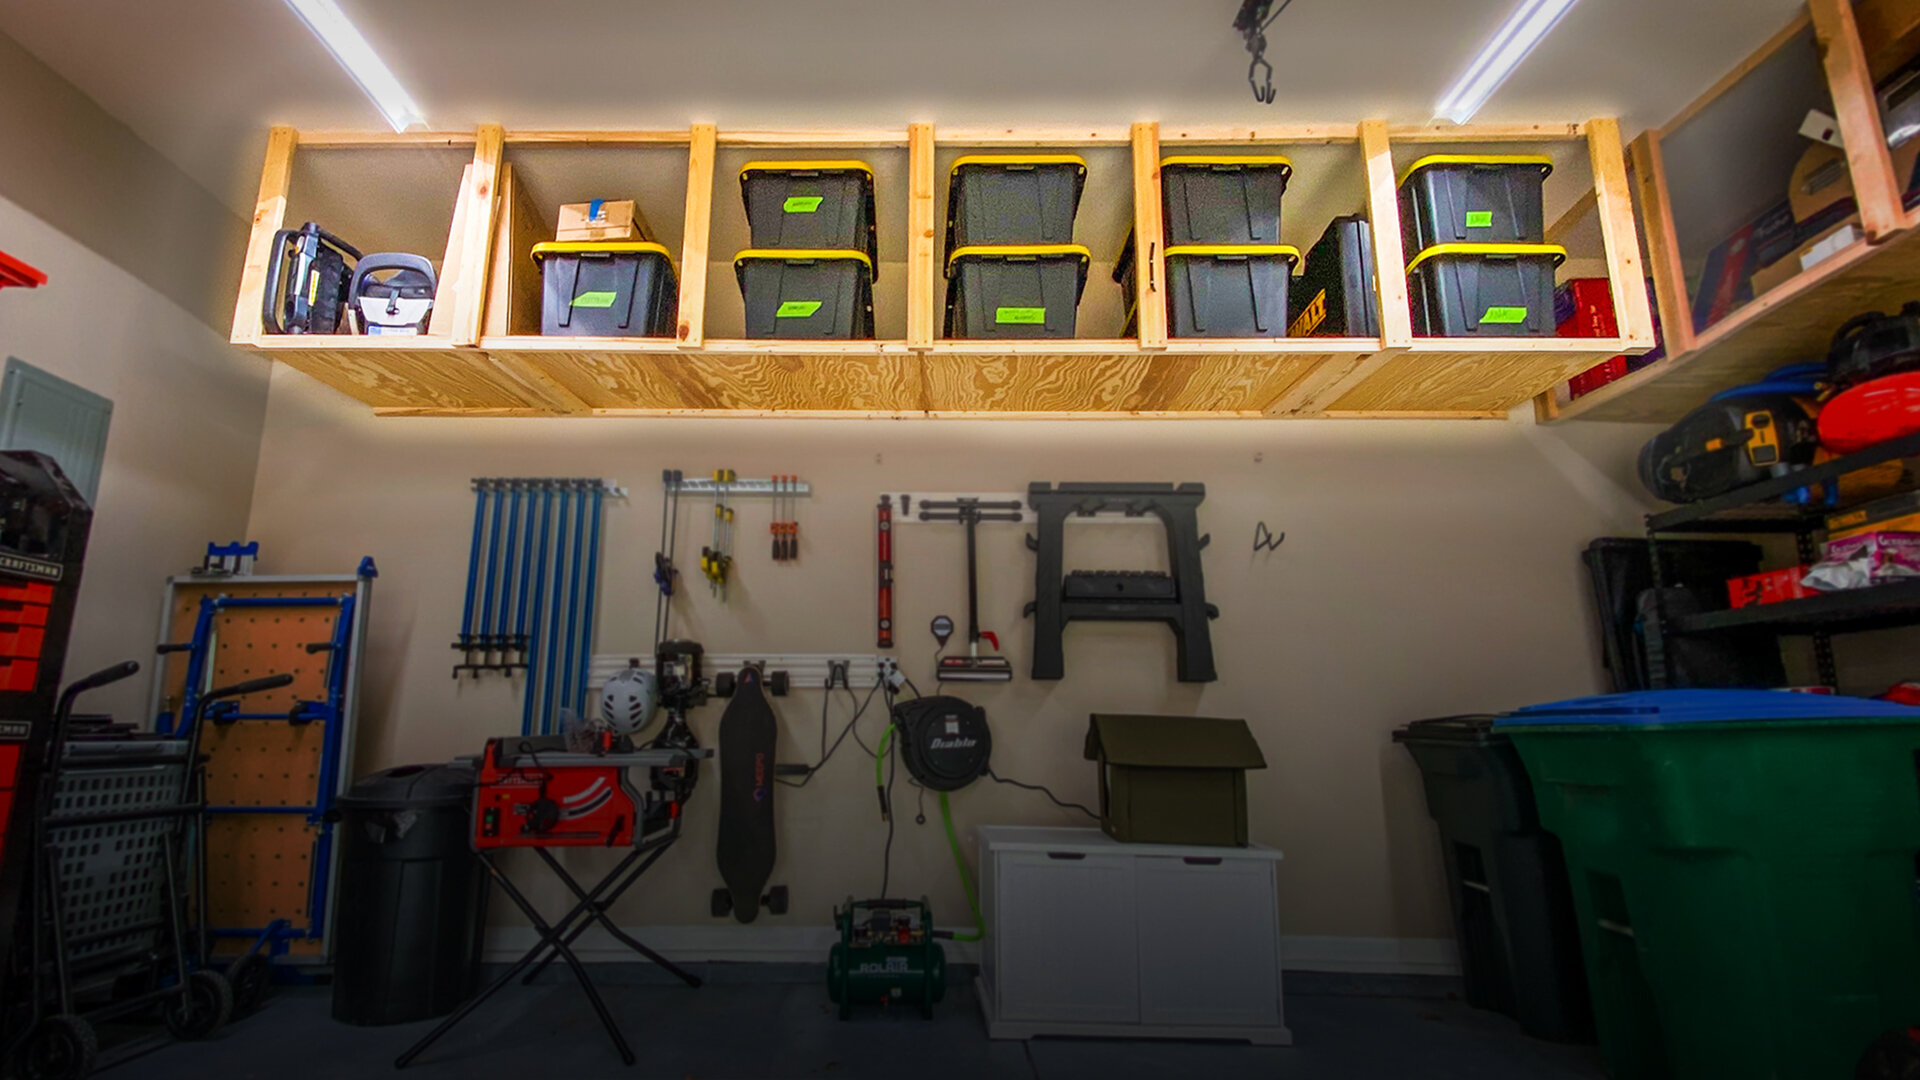 How To Build Diy Garage Storage Shelves, How To Build Shelves In Garage Wall